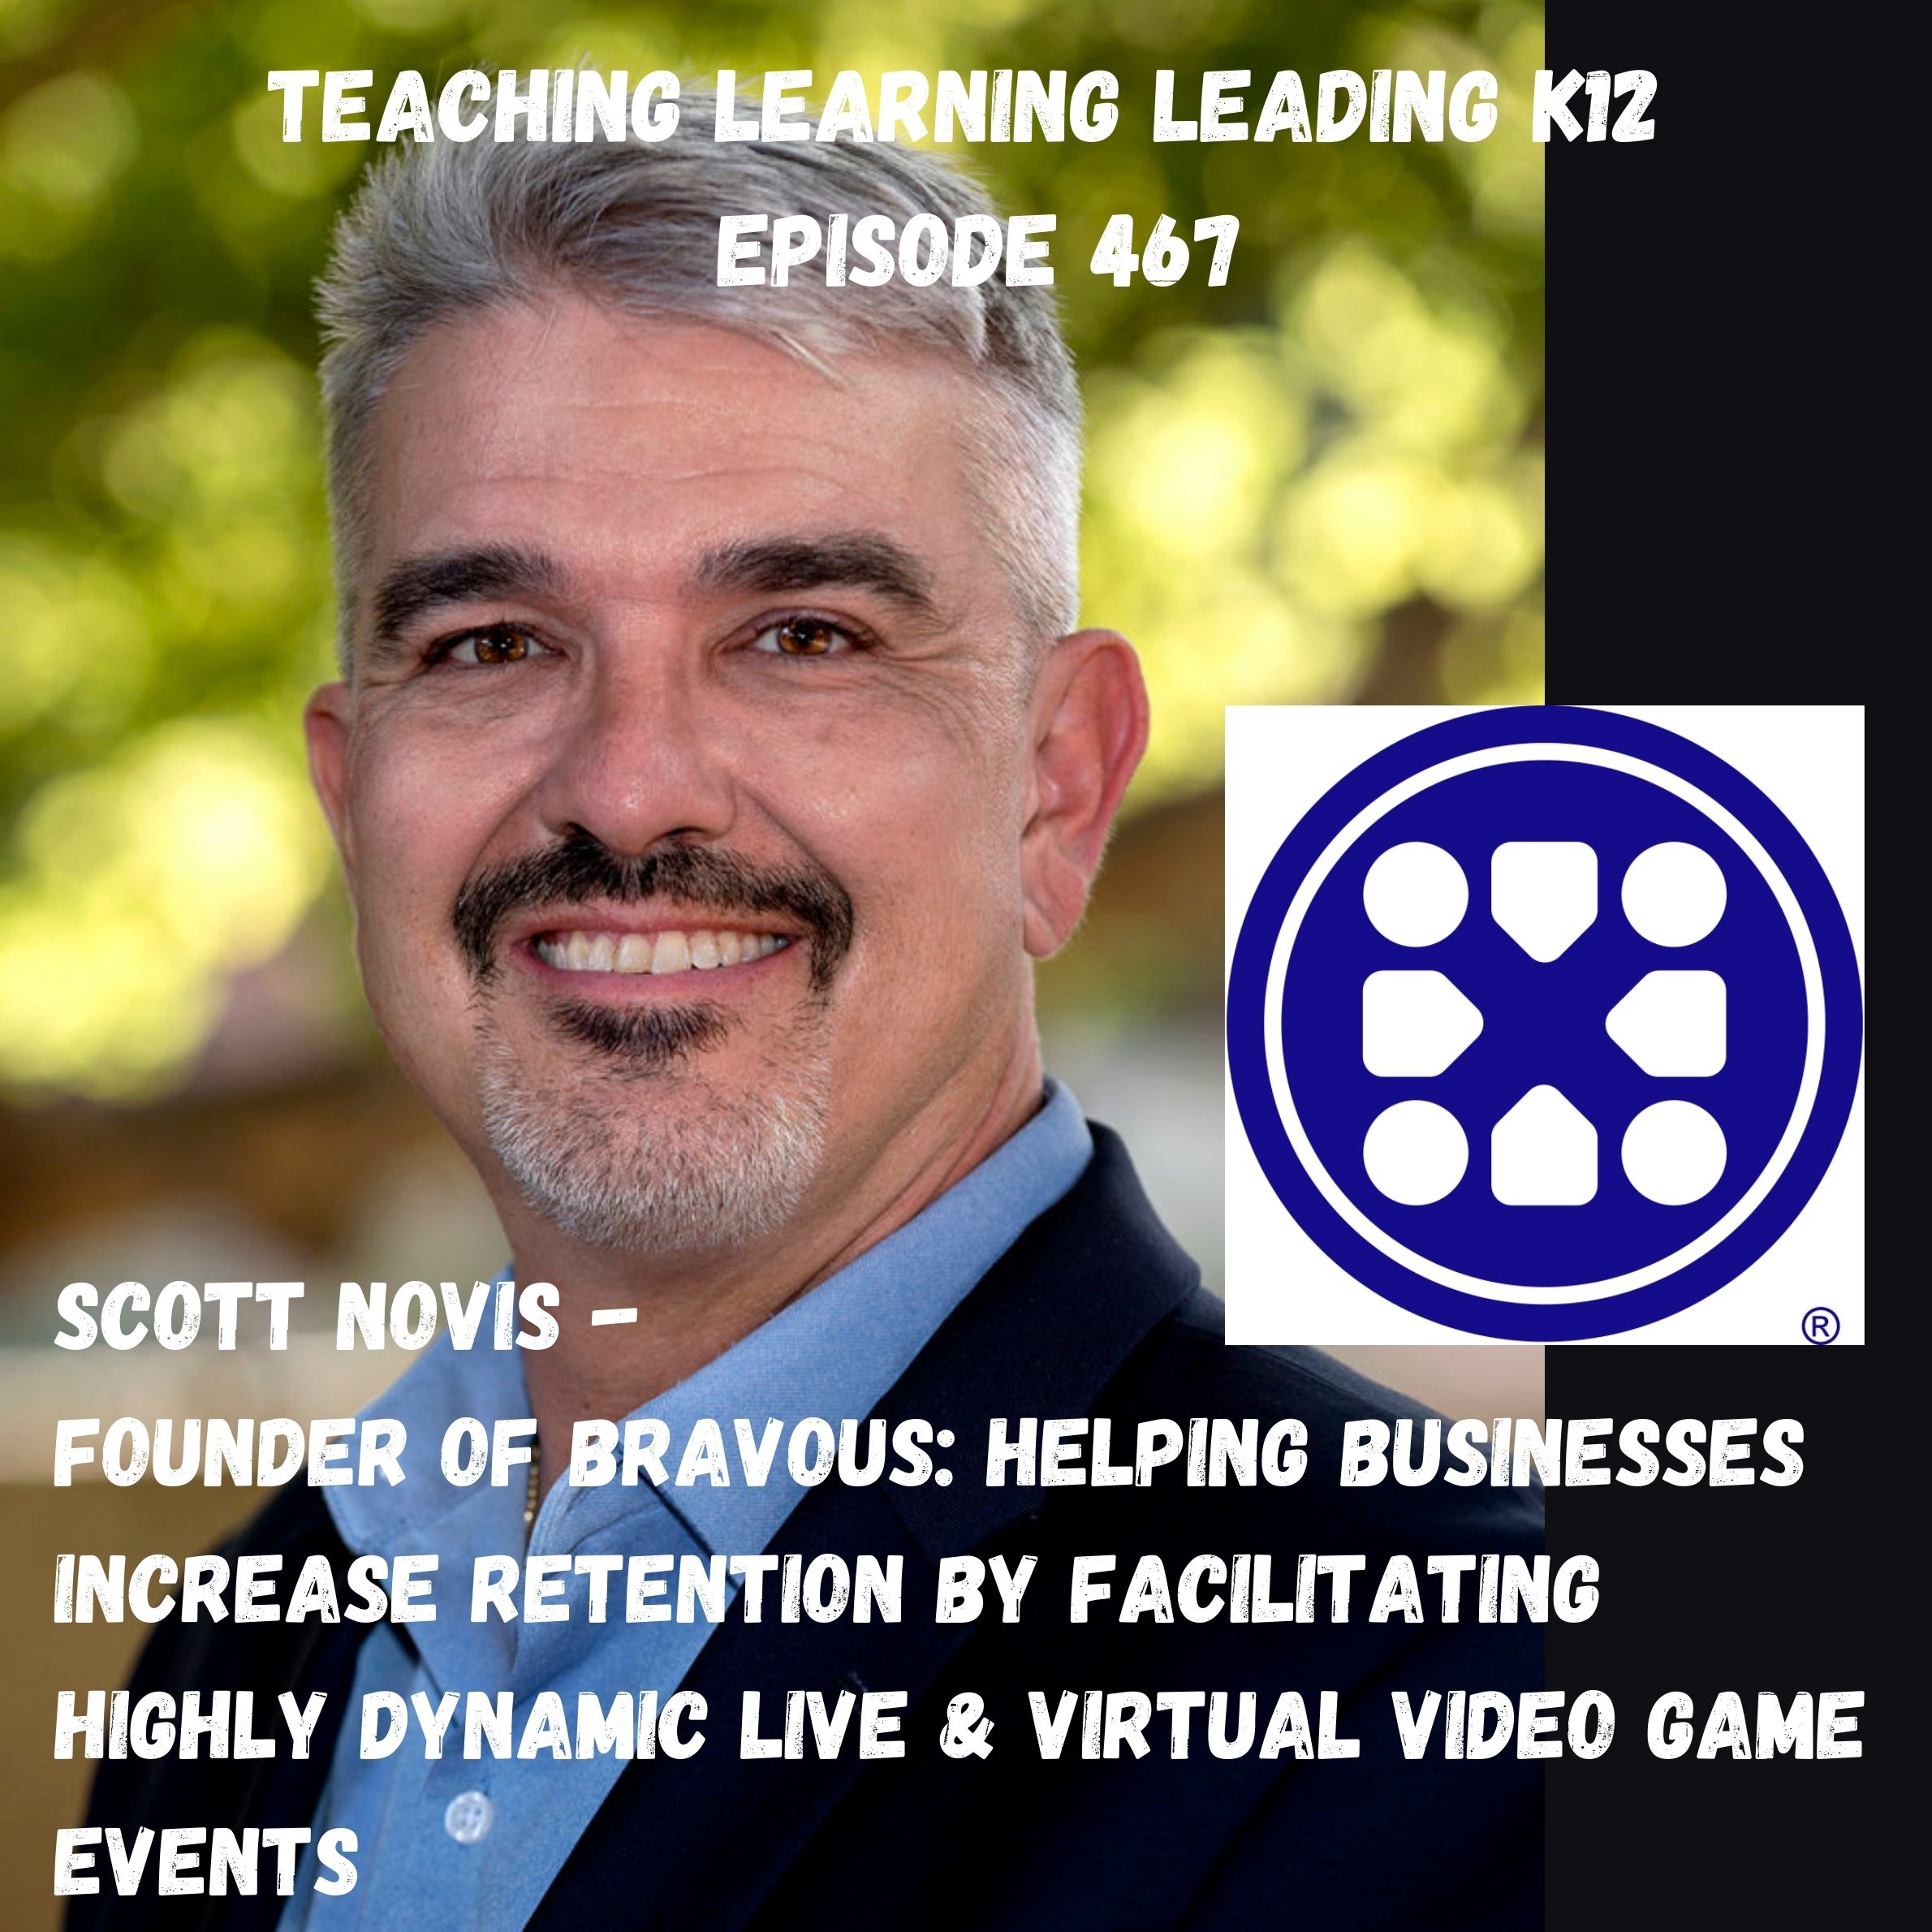 Scott Novis - Founder of Bravous - Helping Businesses Increase Retention By Facilitating Highly Dynamic Live & Virtual Video Game Events - 467